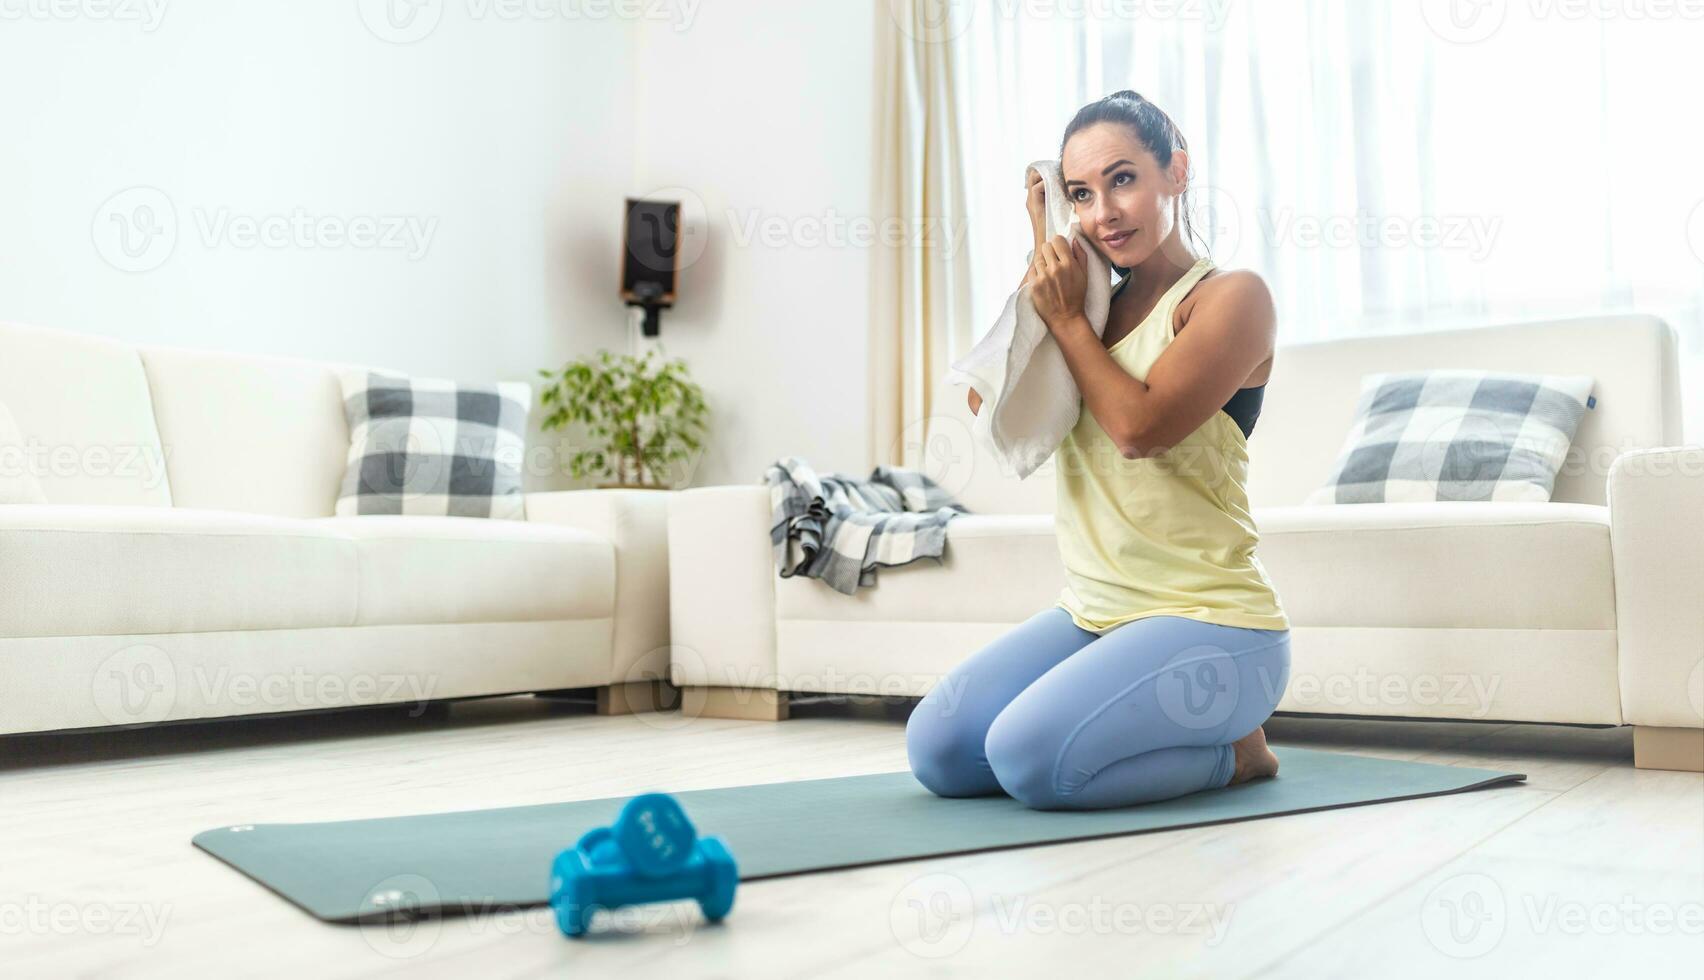 Home workout finish by a good looking girl wiping sweat of her forehead kneeing inside the house photo